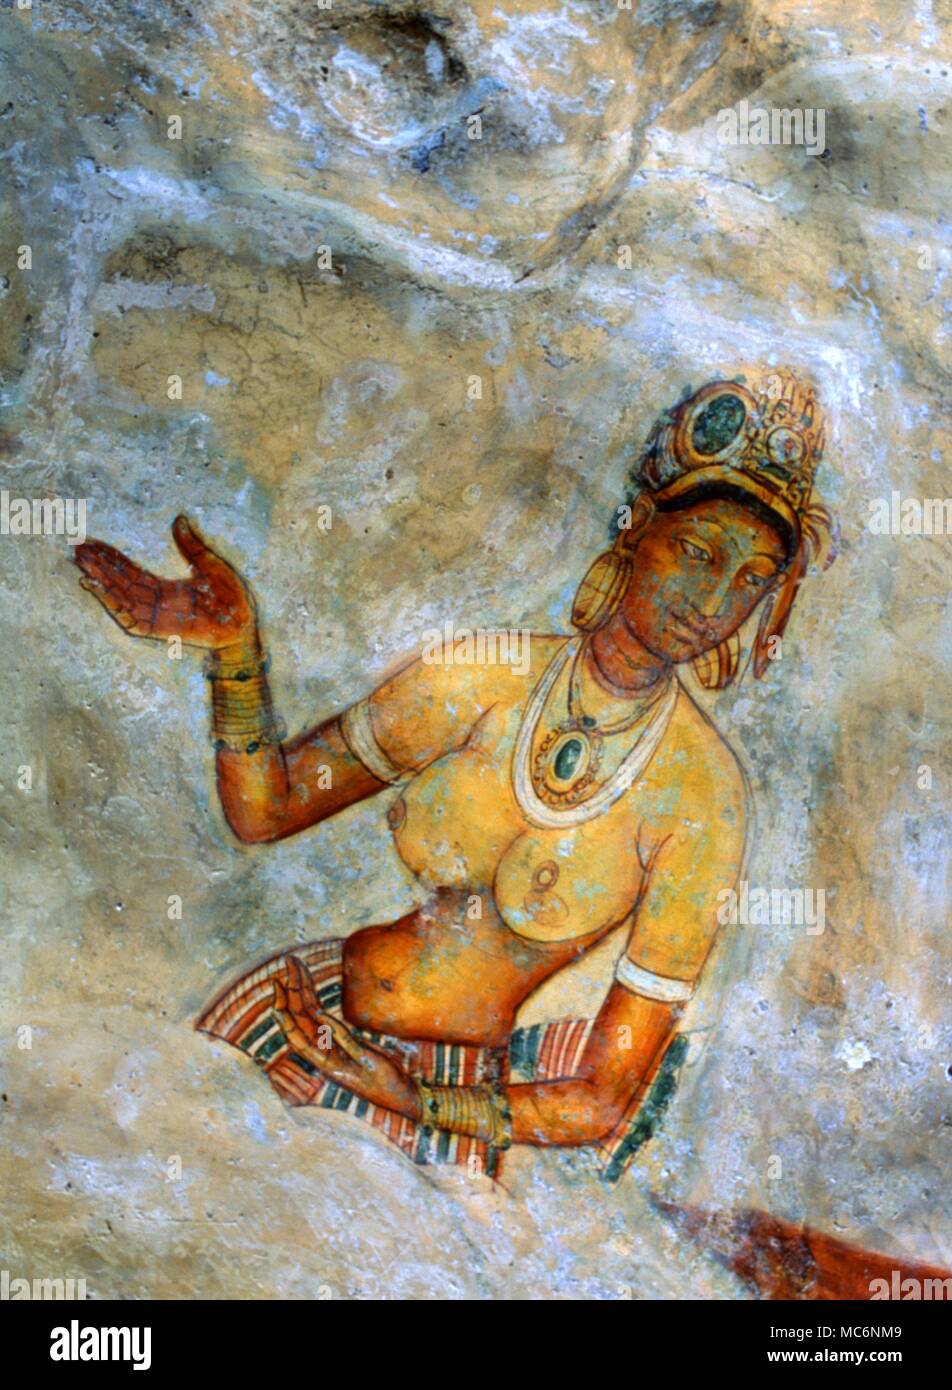 Fresco, painted on rock face of the Lion Rock at Sigriya. The subject is a so-called 'Cloud Maiden'. Painted in the fifth or sixth century AD. Stock Photo